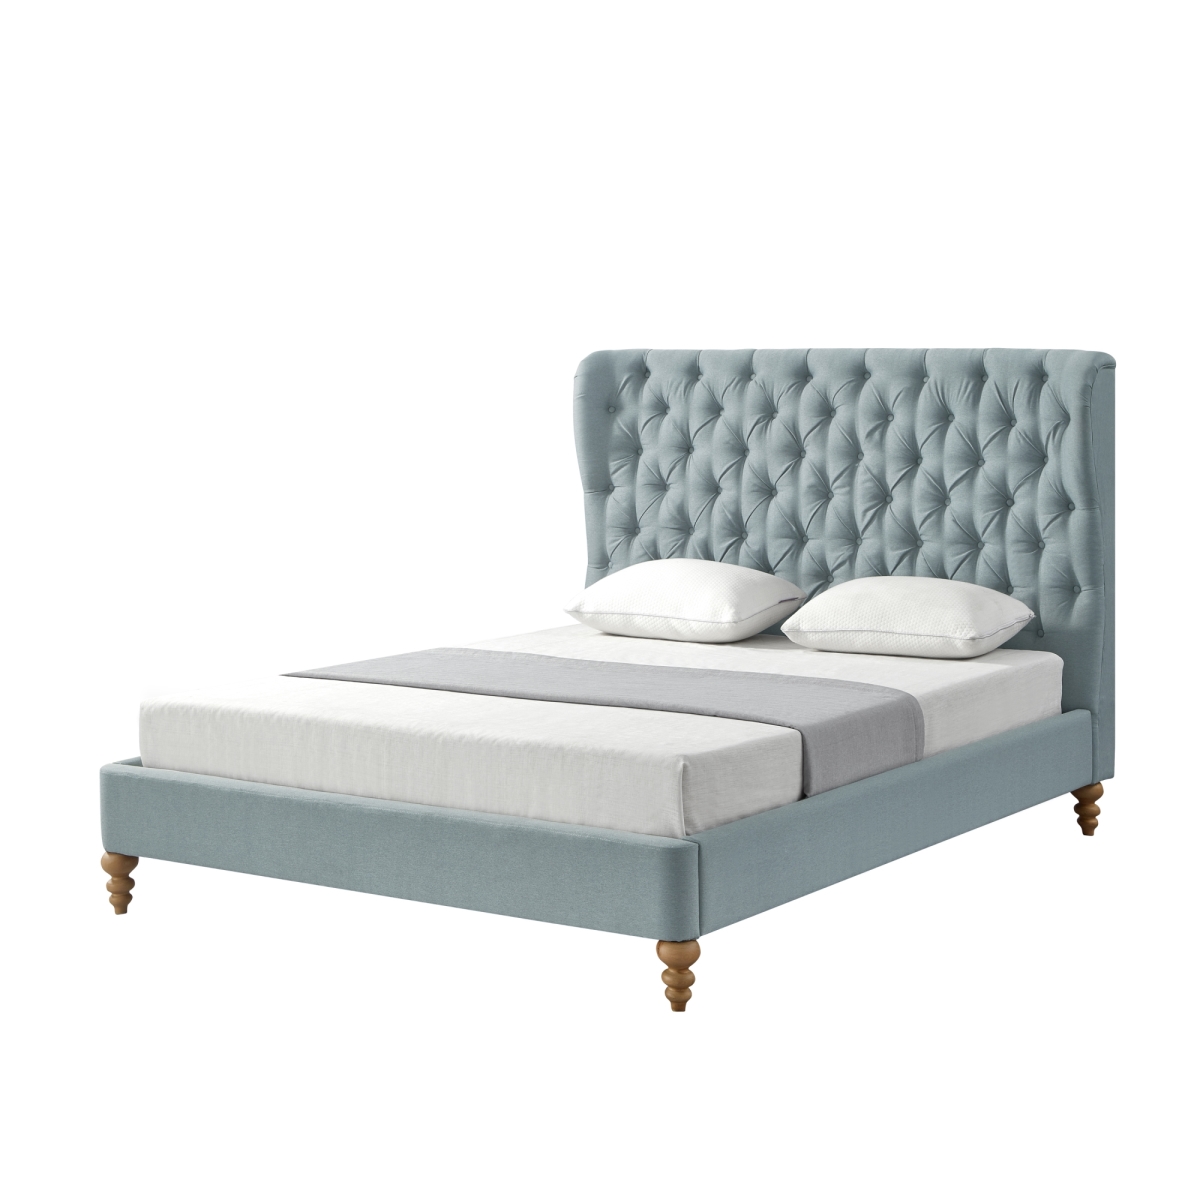 Picture of Rustic Manor SBD253-03BLT-UE Belrose Linen Twin Bedframe with Tufted Headboard - Sea Bl-UE